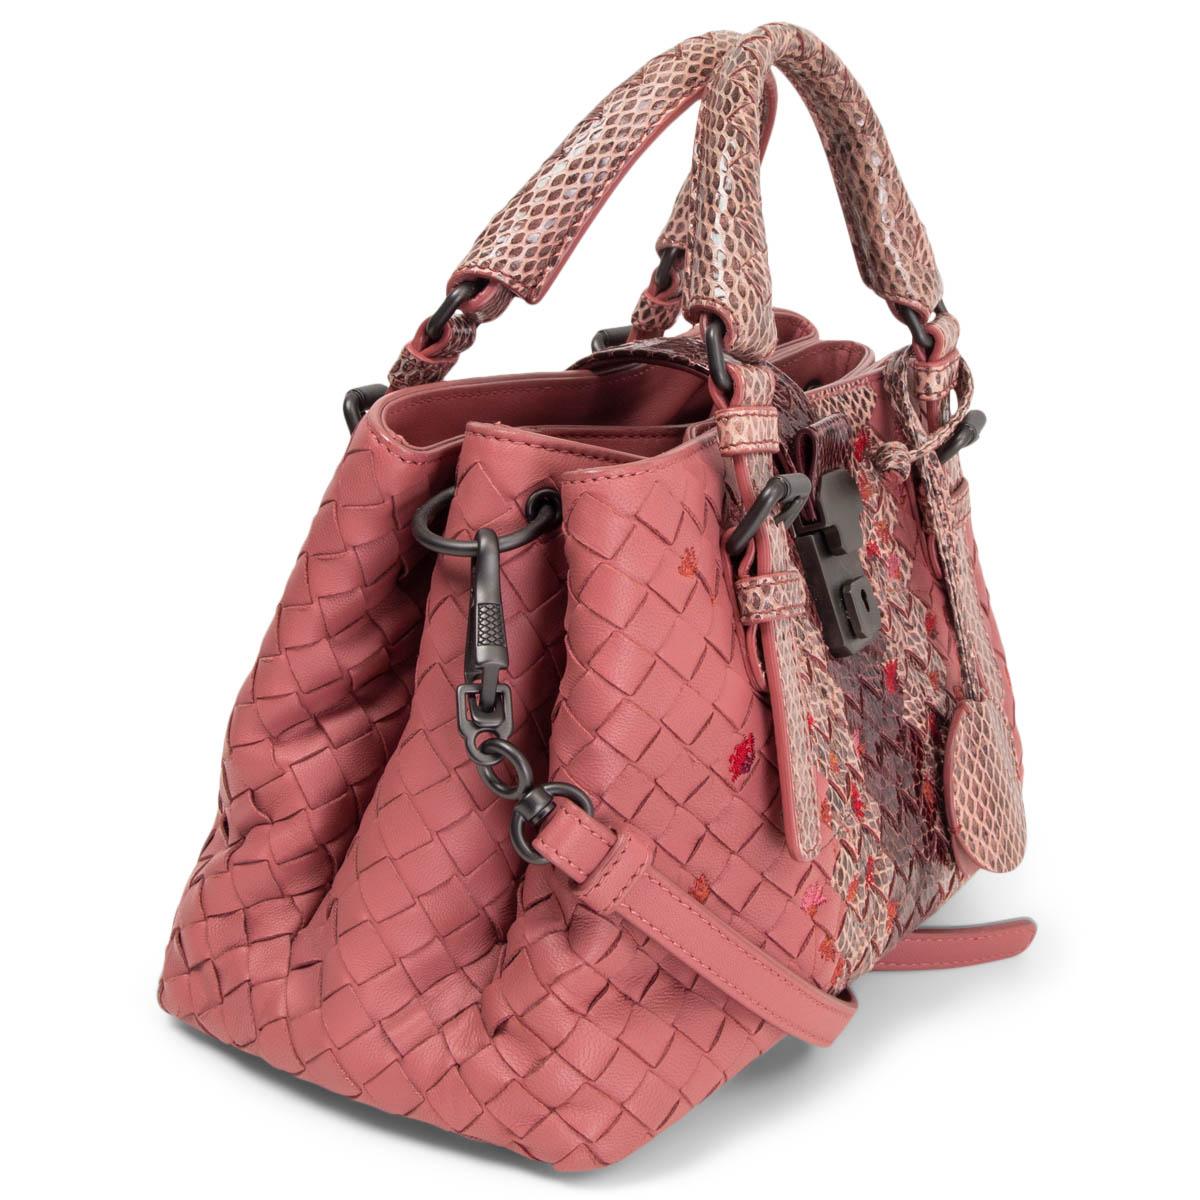 100% authentic Bottega Veneta 2017 Roma Small Bag in framboise Intreccito nappa leather and ayers (snakeskin) embroidered with small pink, orange and red flowers. Opens with a push-lock and is divided in three compartments, lined in taupe suede with